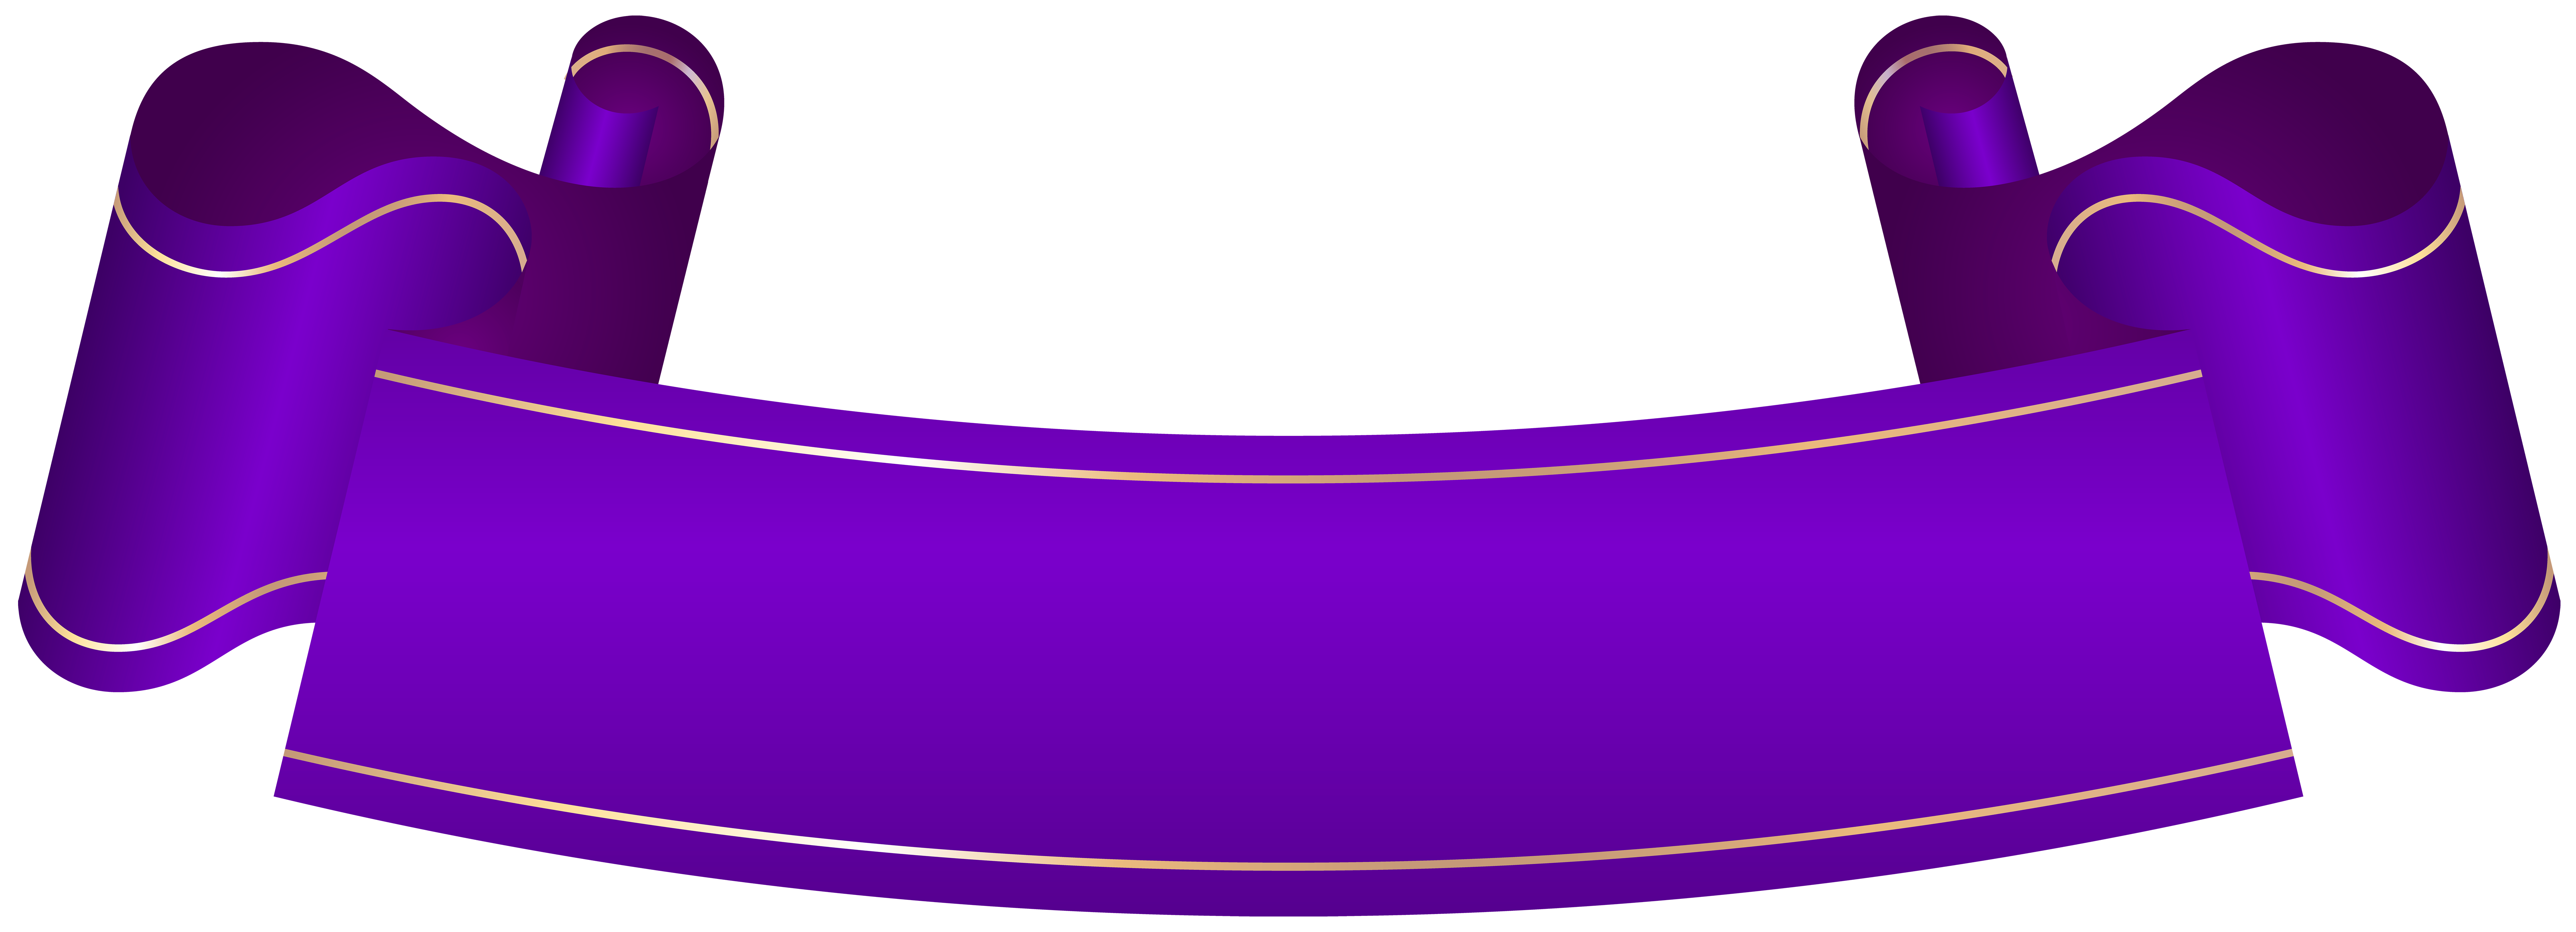 free-purple-banner-cliparts-download-free-purple-banner-cliparts-png-images-free-cliparts-on